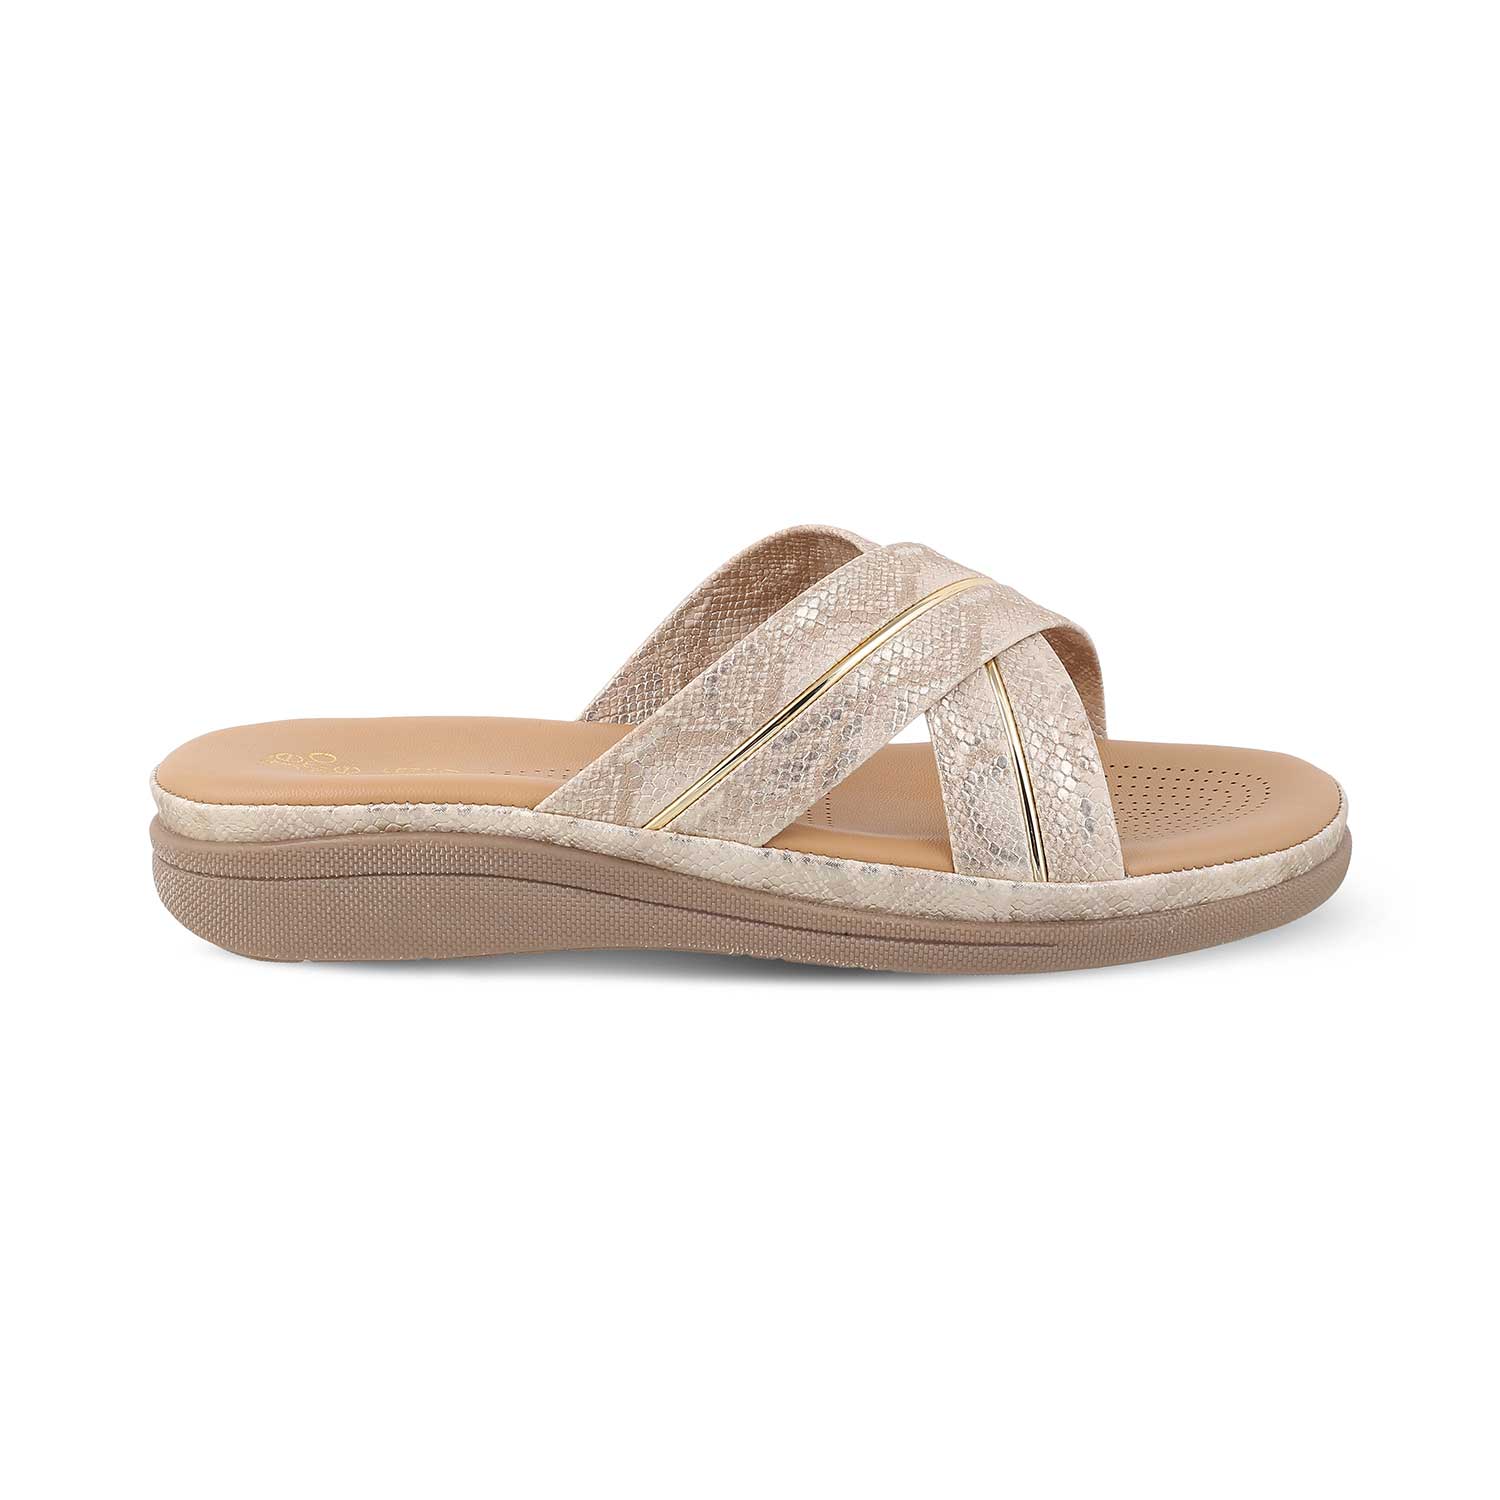 The Slide Gold Women's Casual Flats Tresmode